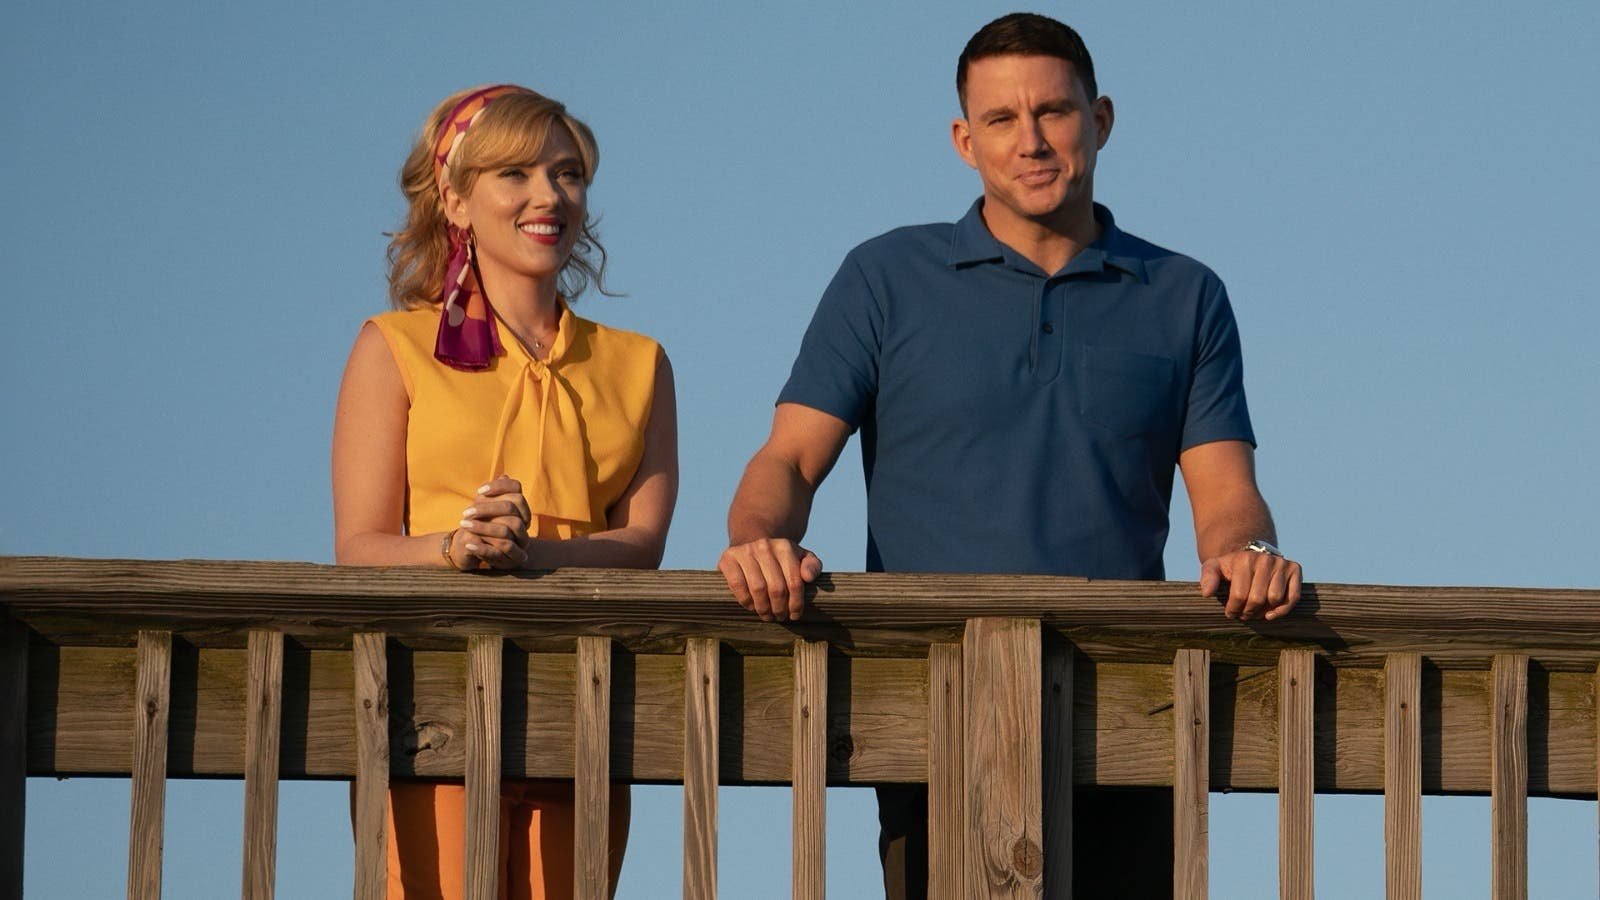 Scarlett Johansson Teams Up with Channing Tatum in ‘Fly Me to the Moon’